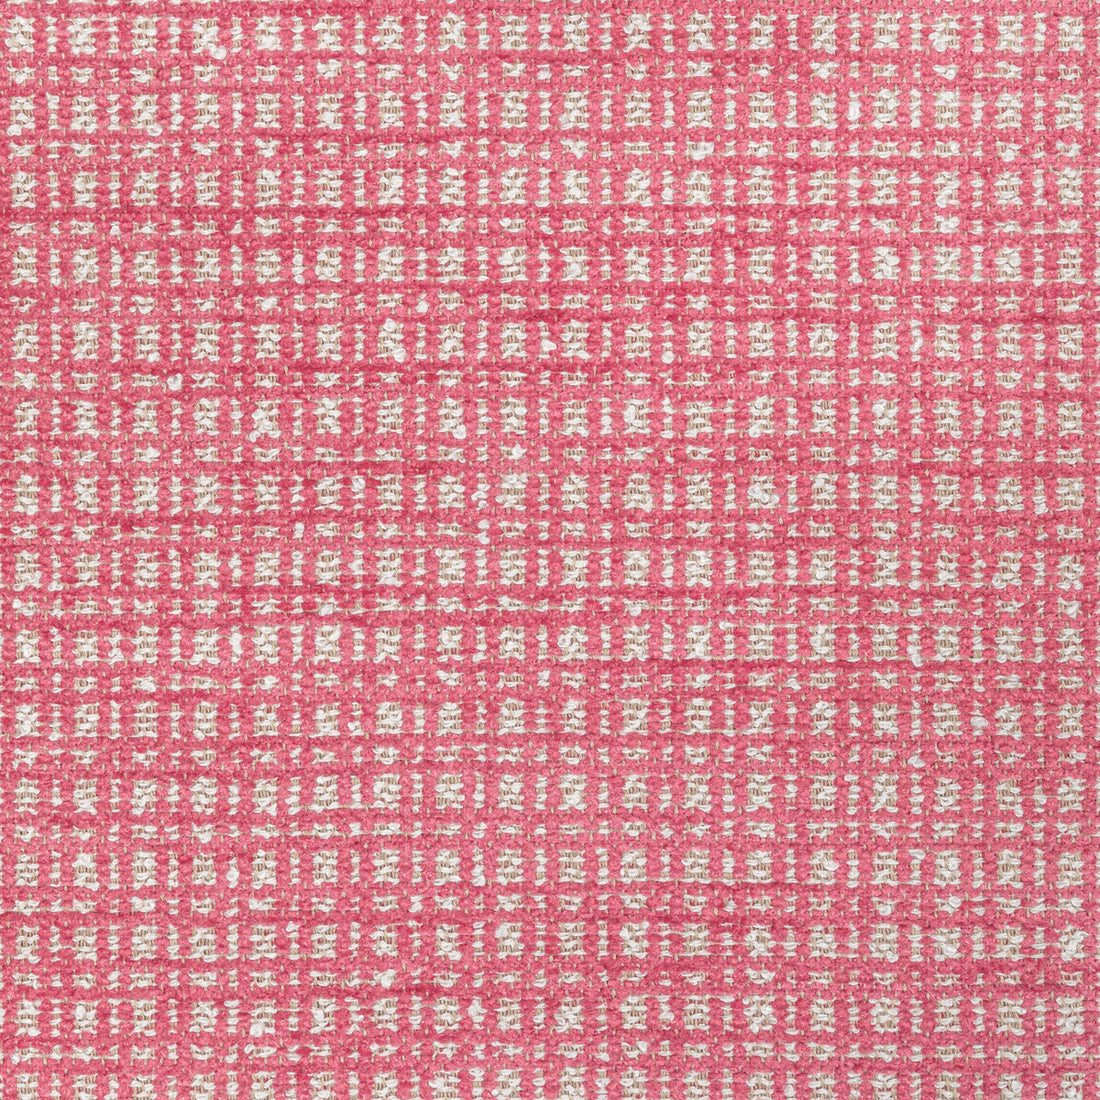 Landiers Texture fabric in pink color - pattern 8022123.7.0 - by Brunschwig &amp; Fils in the Chambery Textures III collection